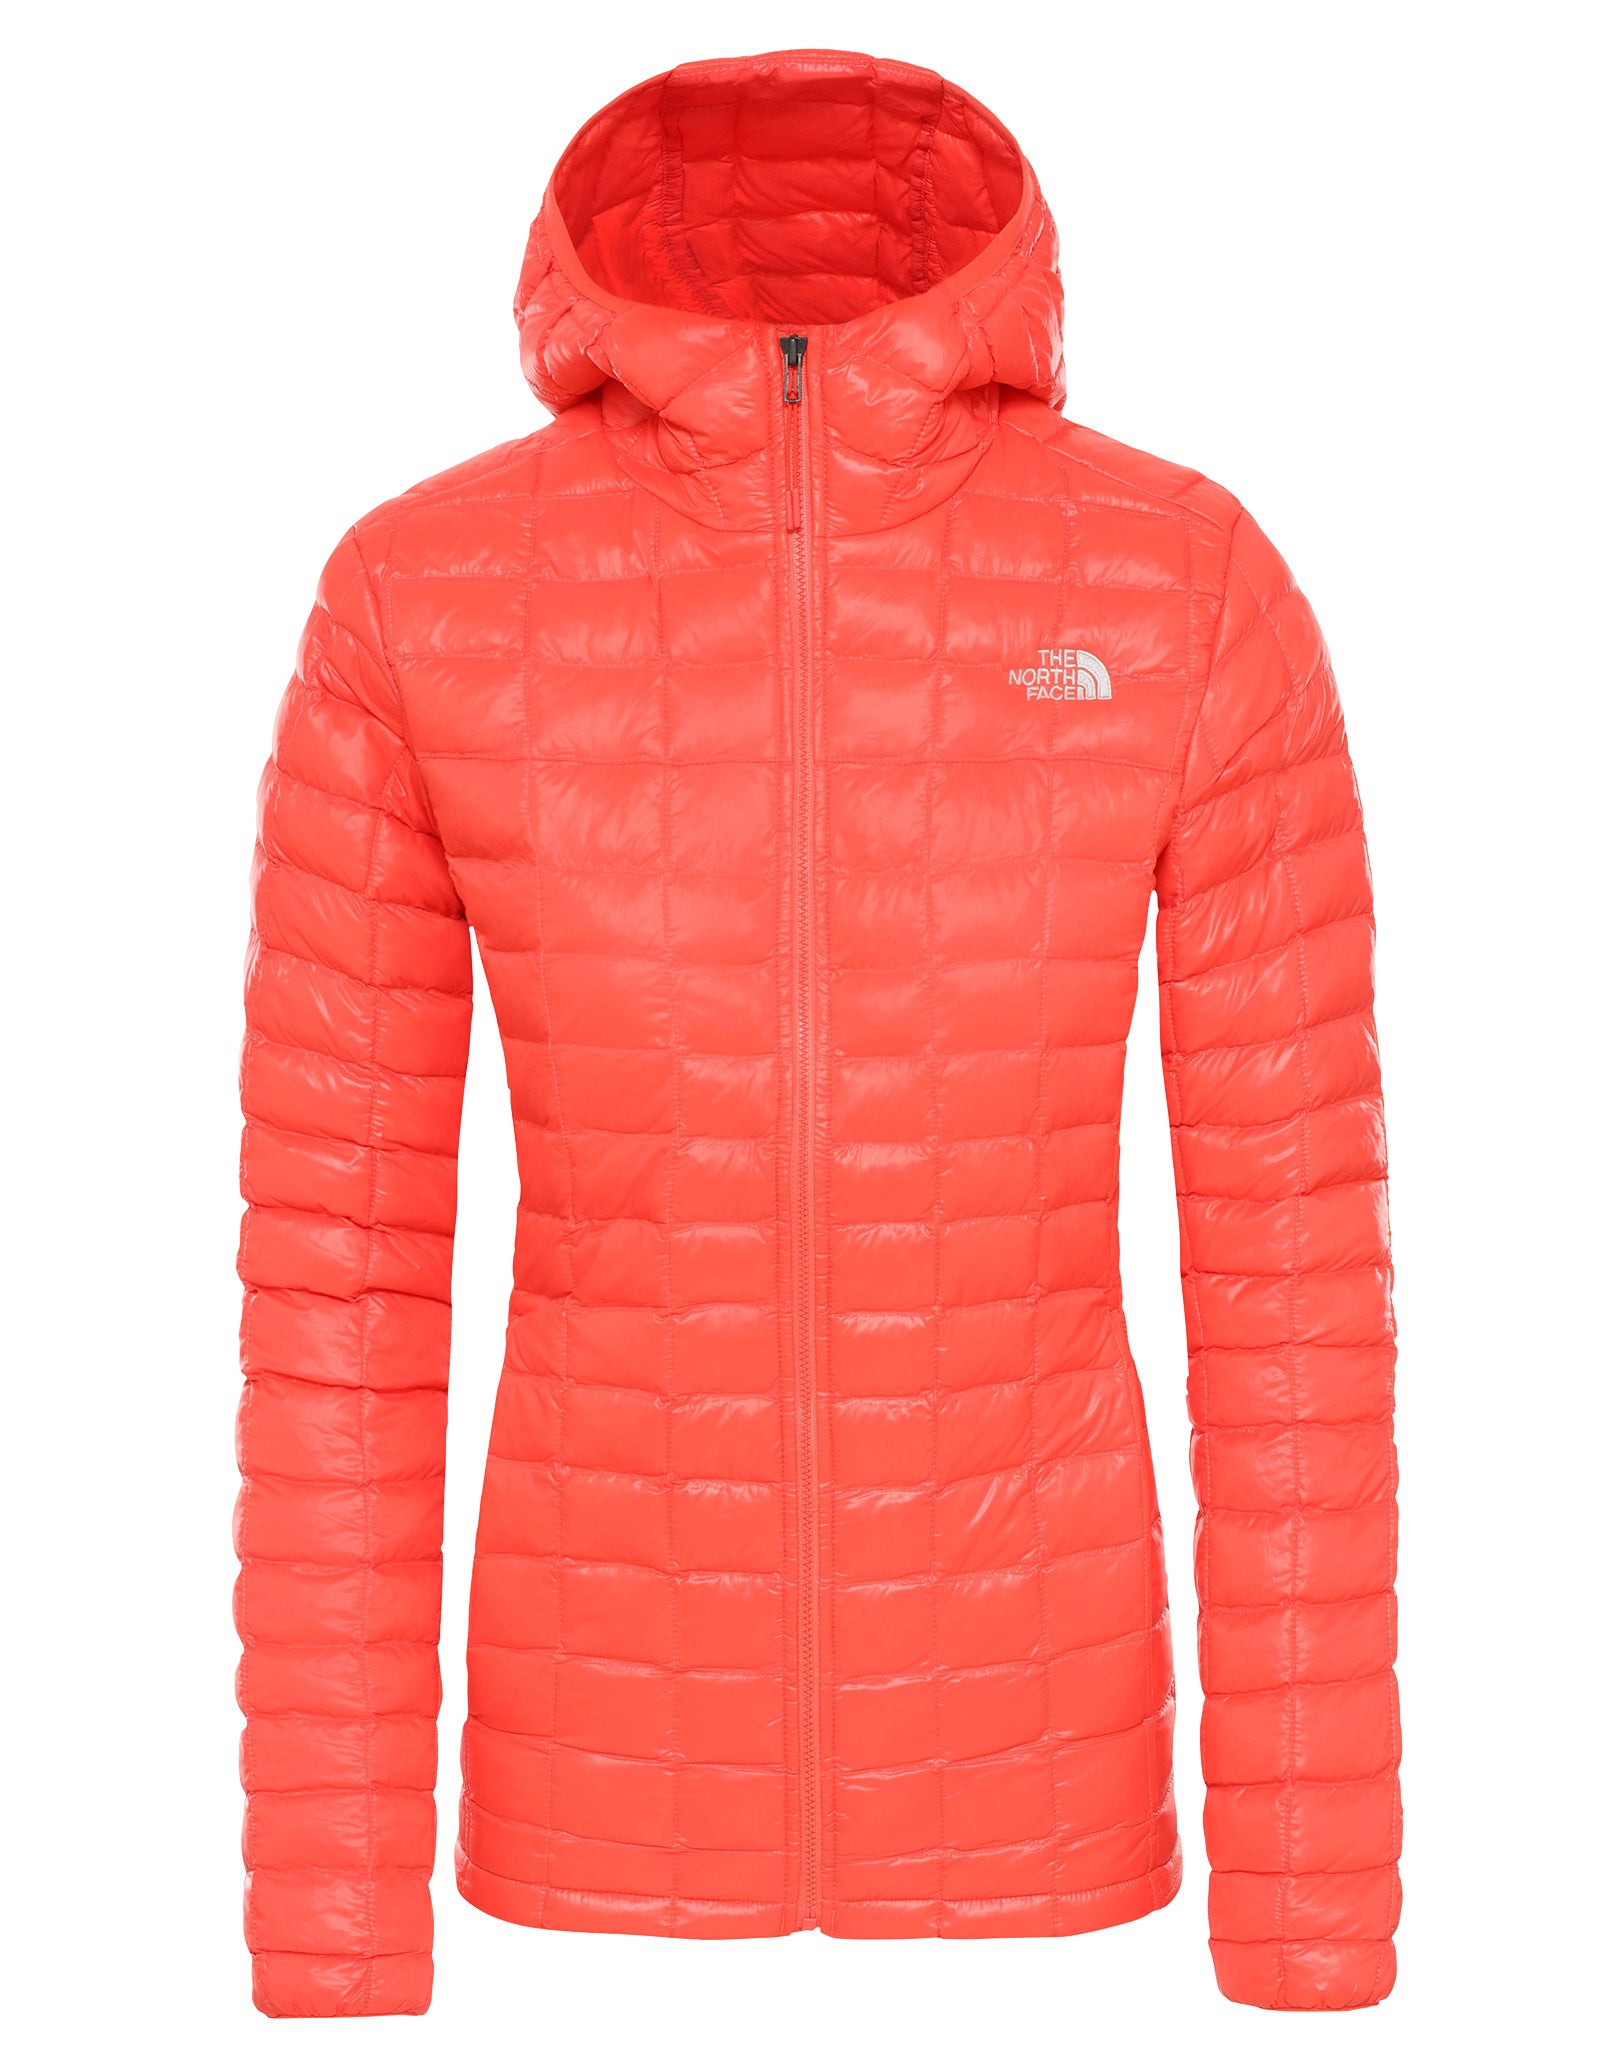 thermoball hooded jacket women's